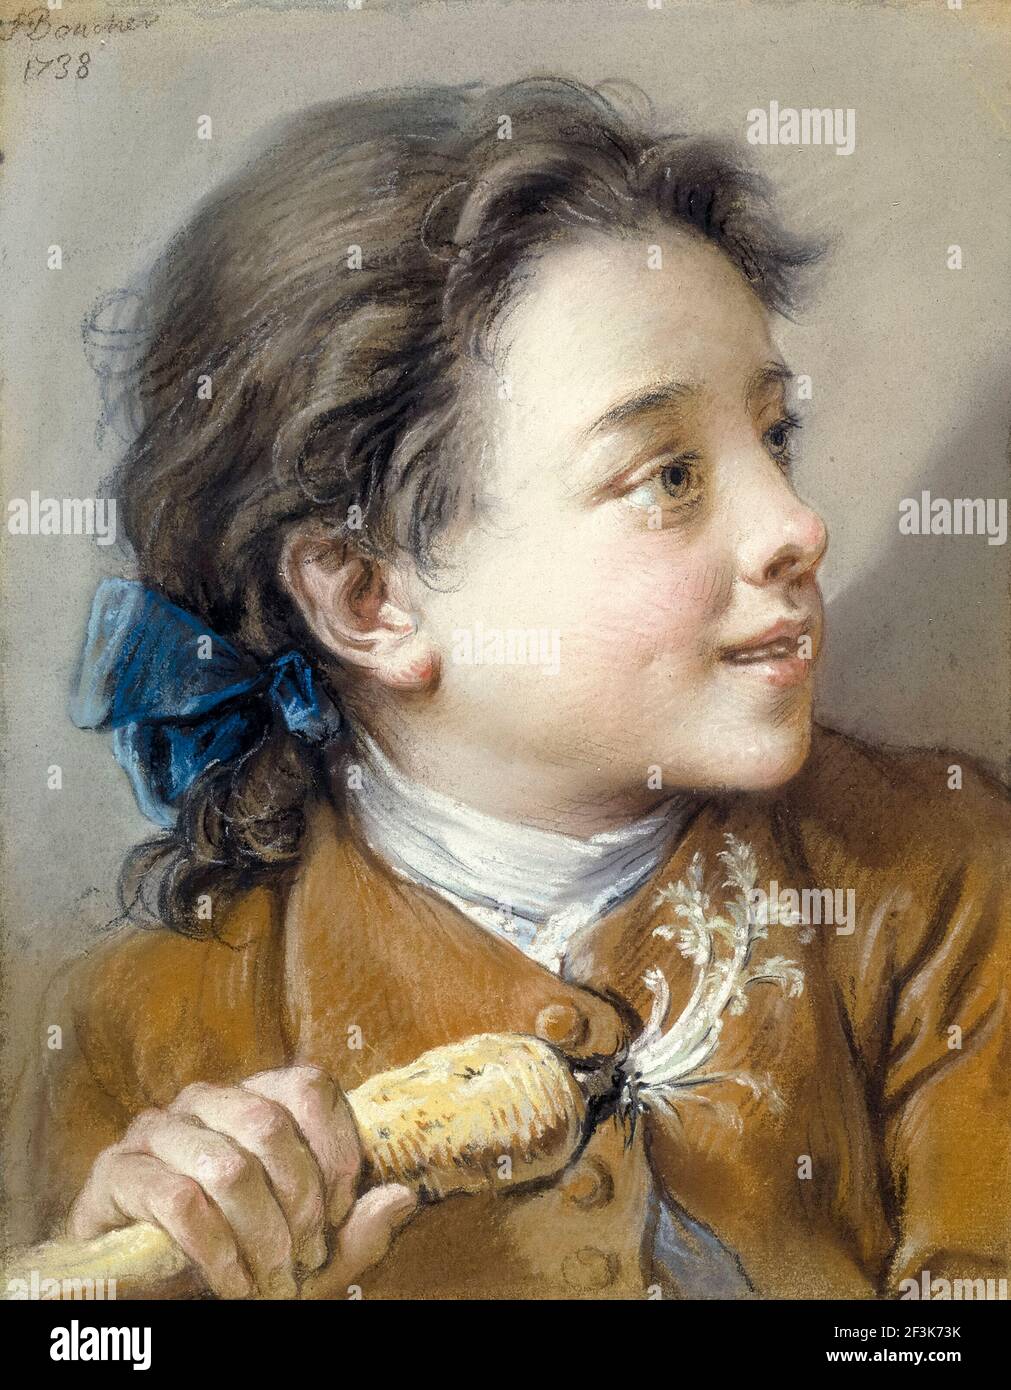 François Boucher, Boy with a Carrot, portrait drawing, 1738 Stock Photo